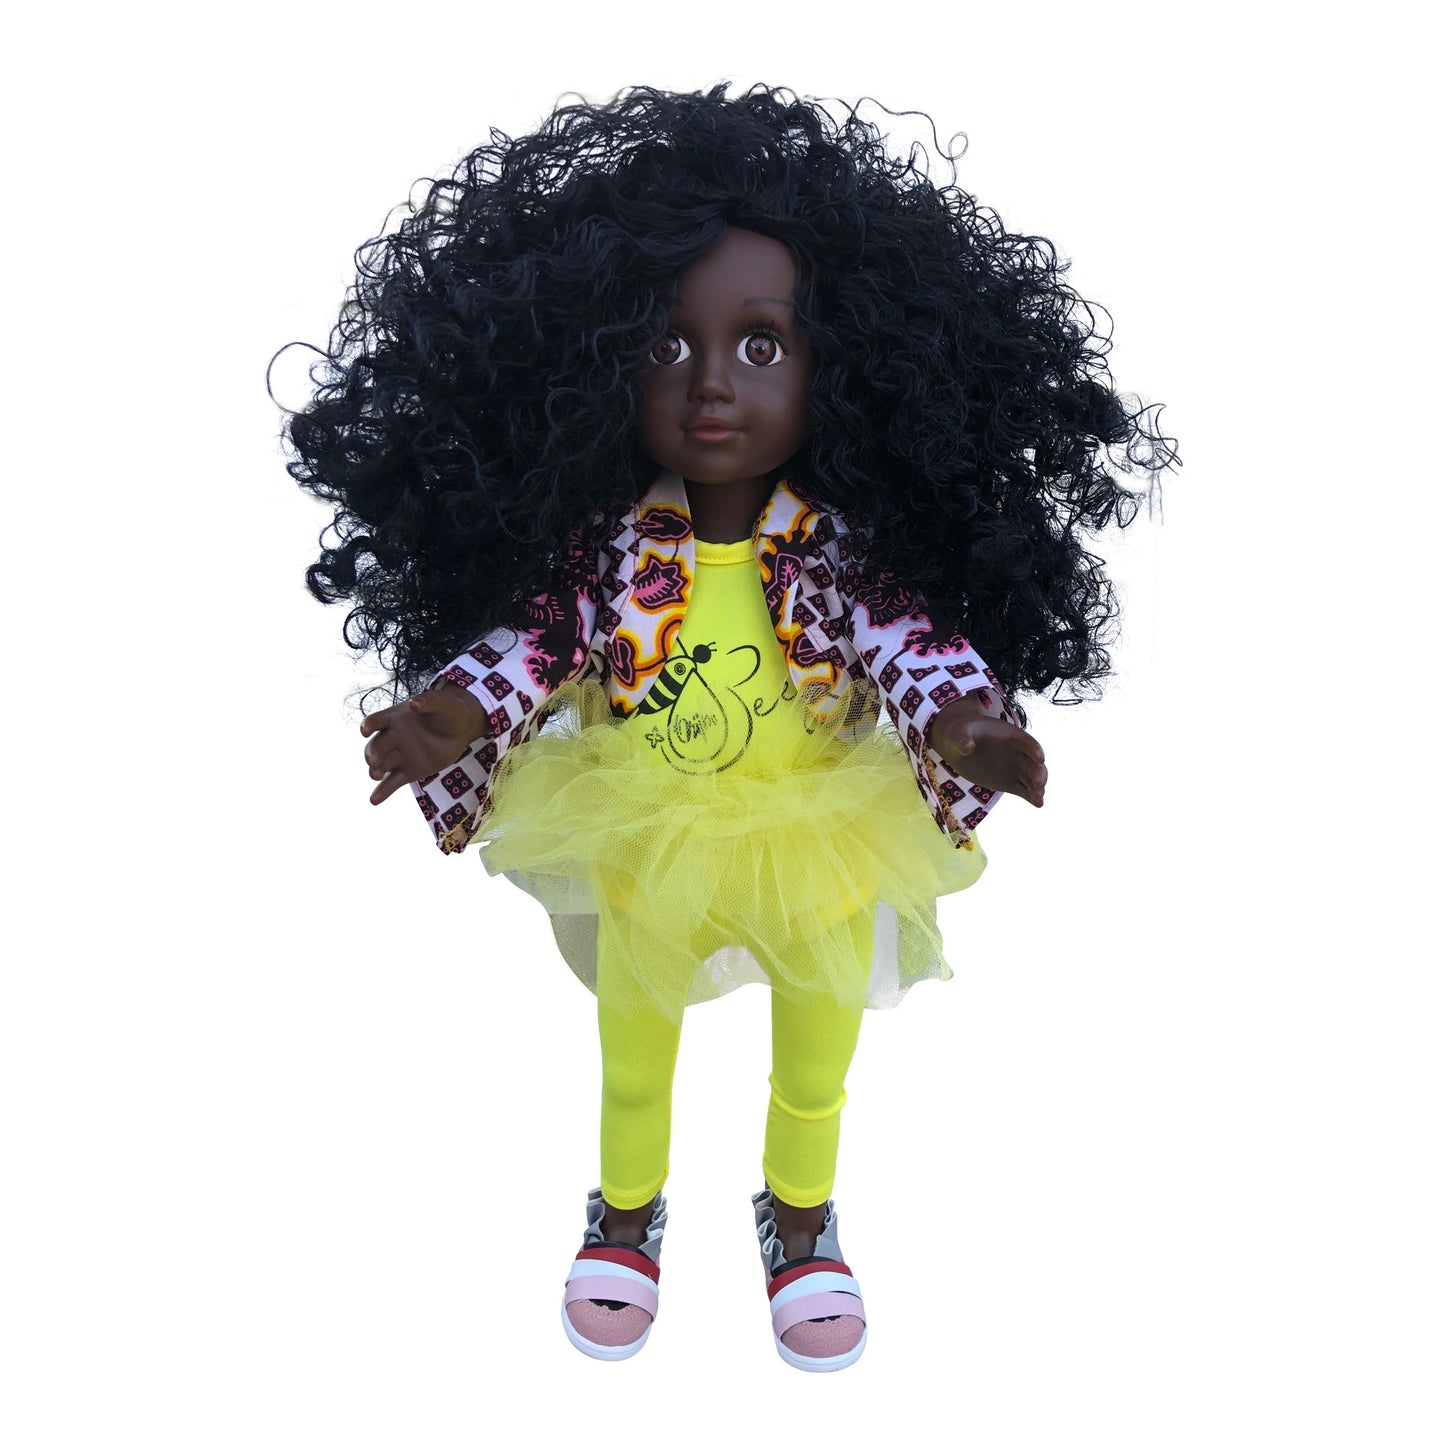 Curl Girlfriend Trudy -  African American Black Latino Hispanic Biracial Multicultural Curly Natural Hair 18 inch Fashion Doll